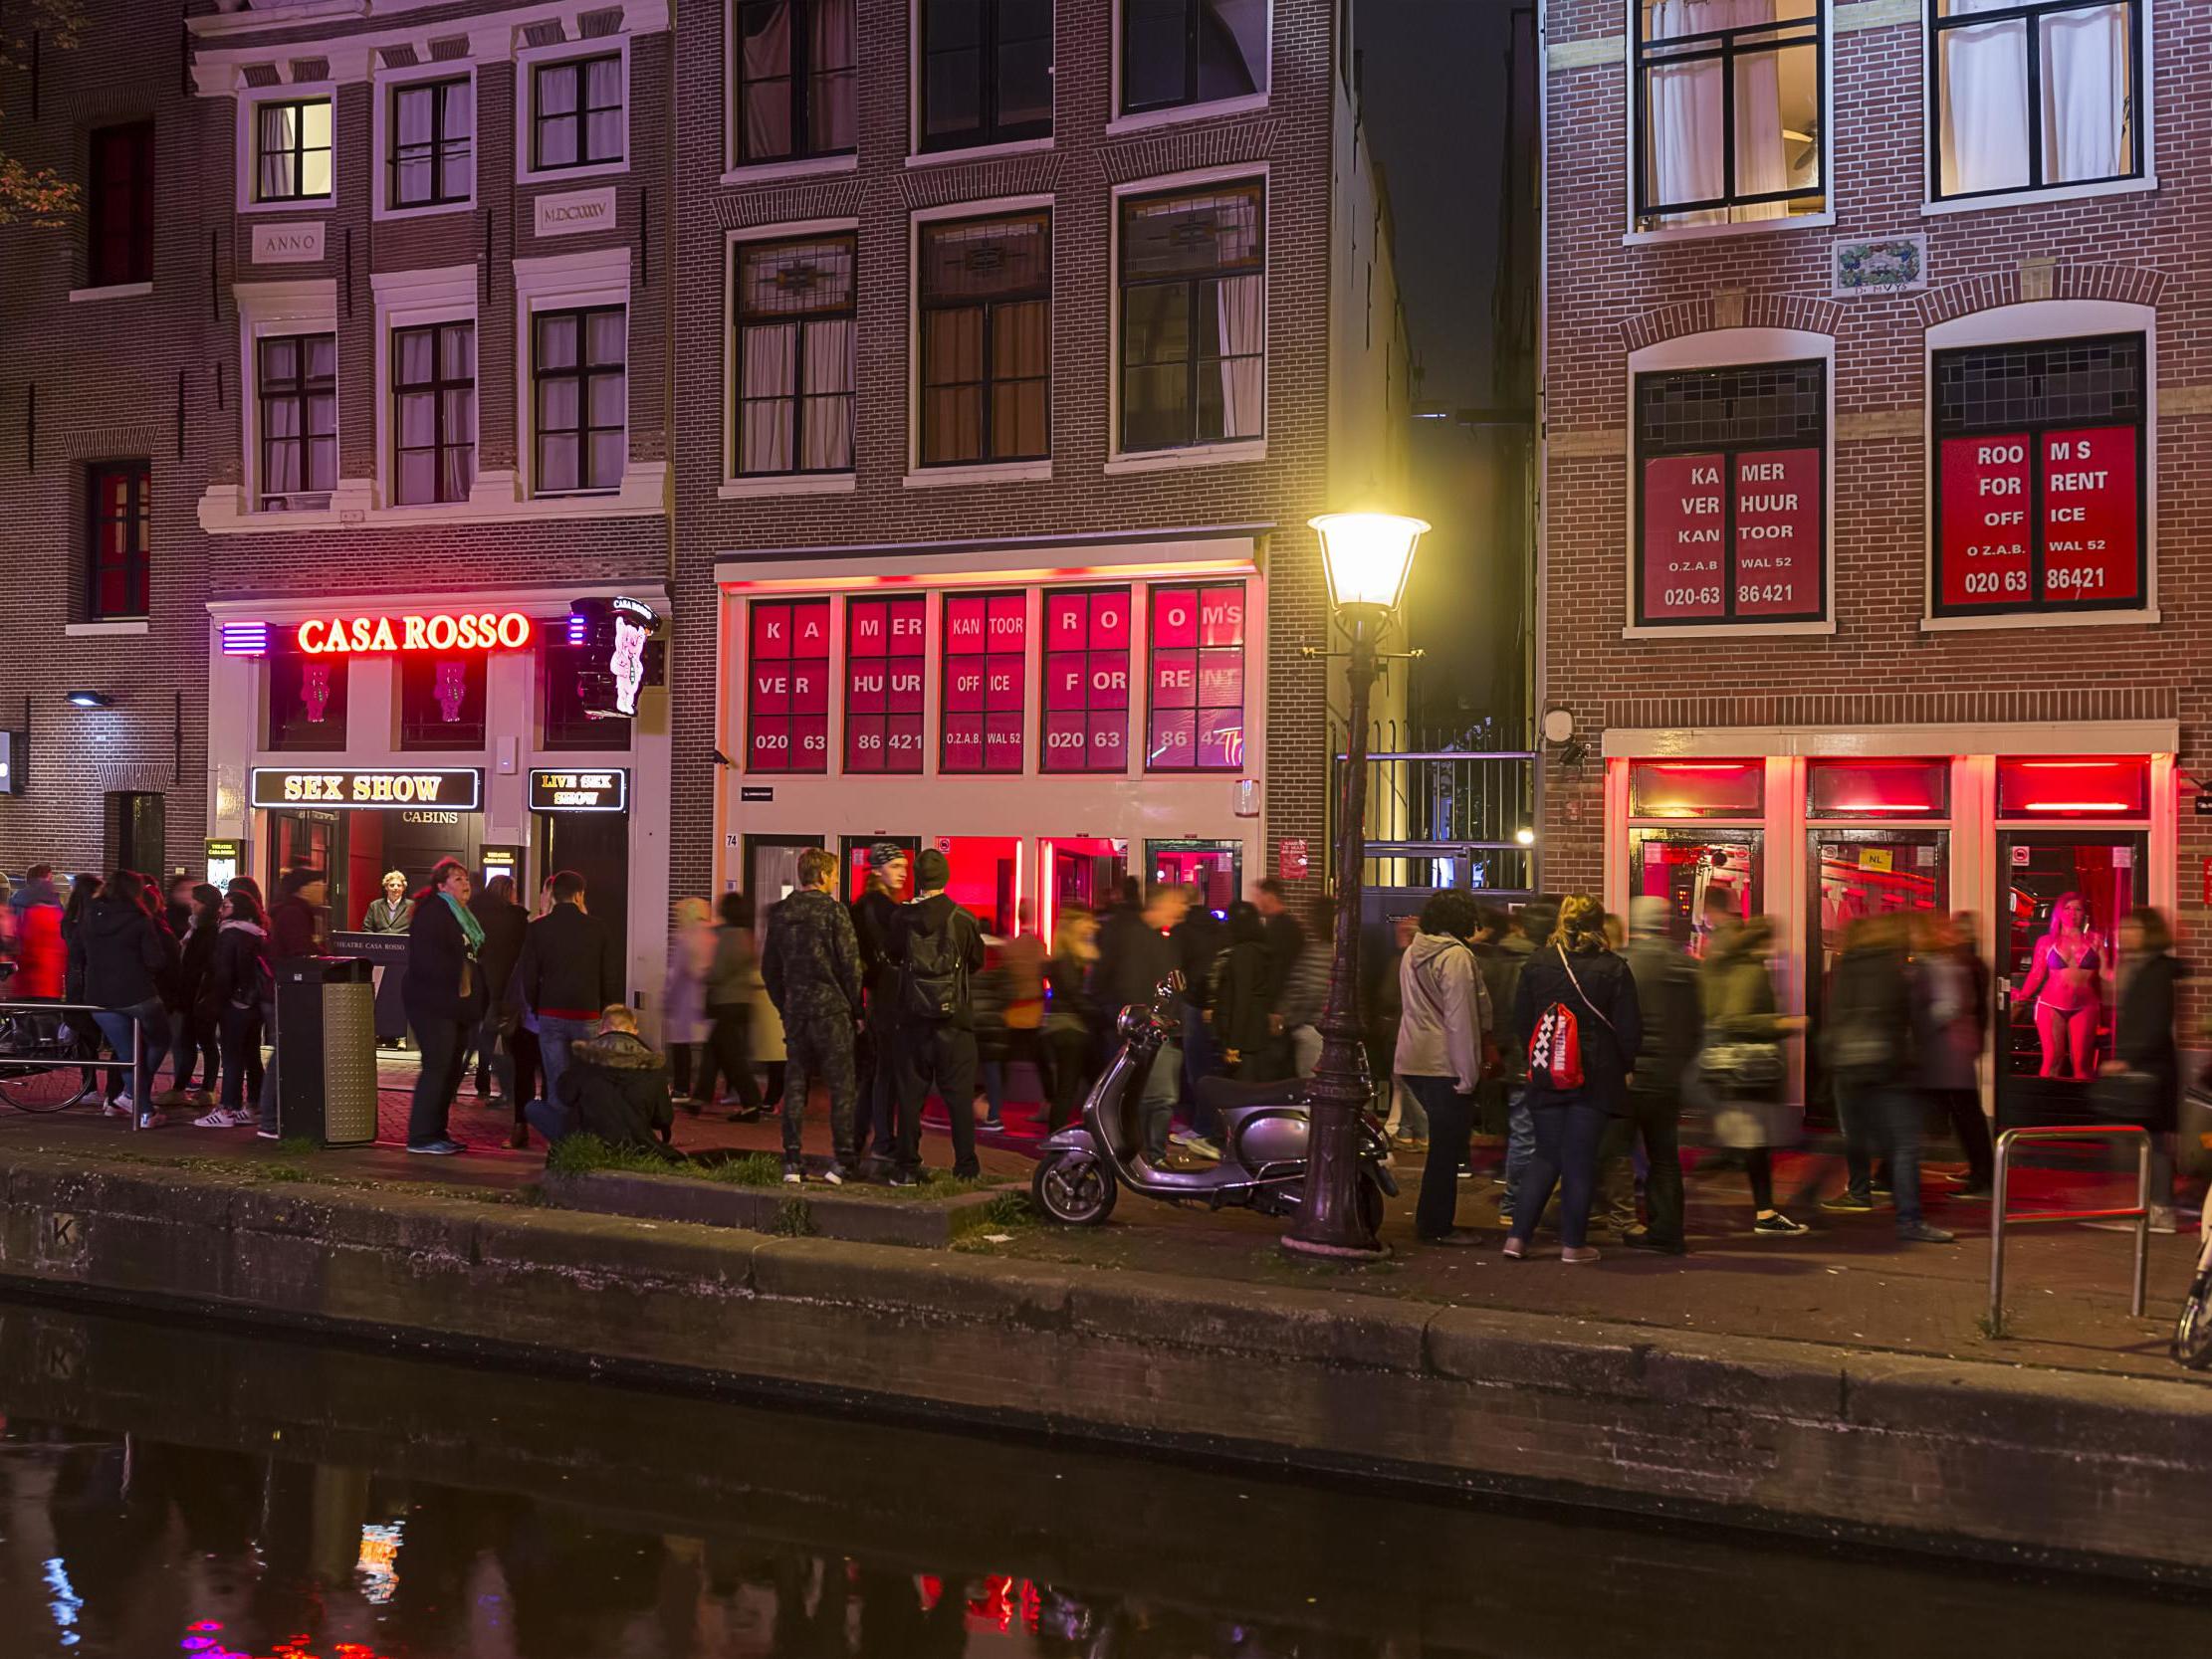 Stock image of the red light district, in Amsterdam.